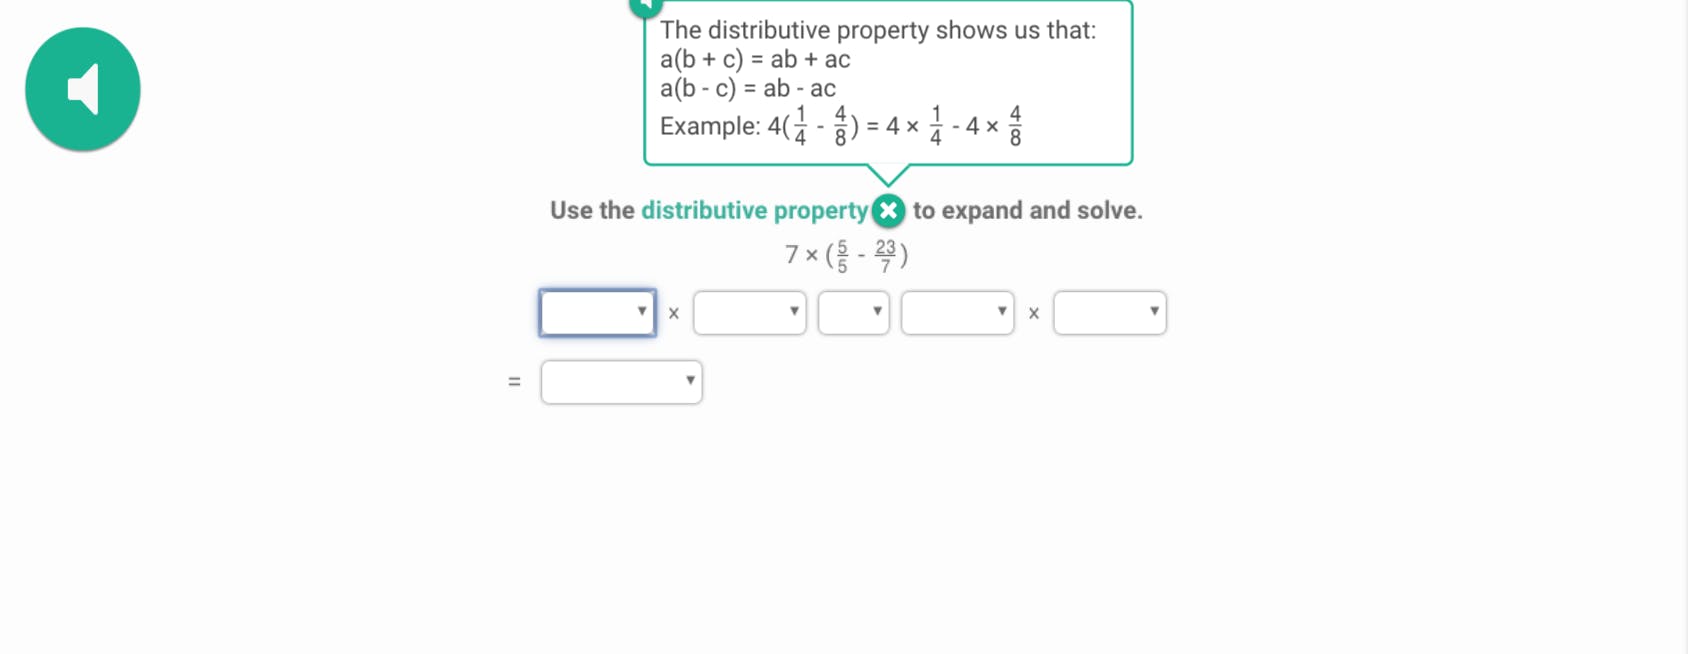 Exploring distributive property in Prodigy